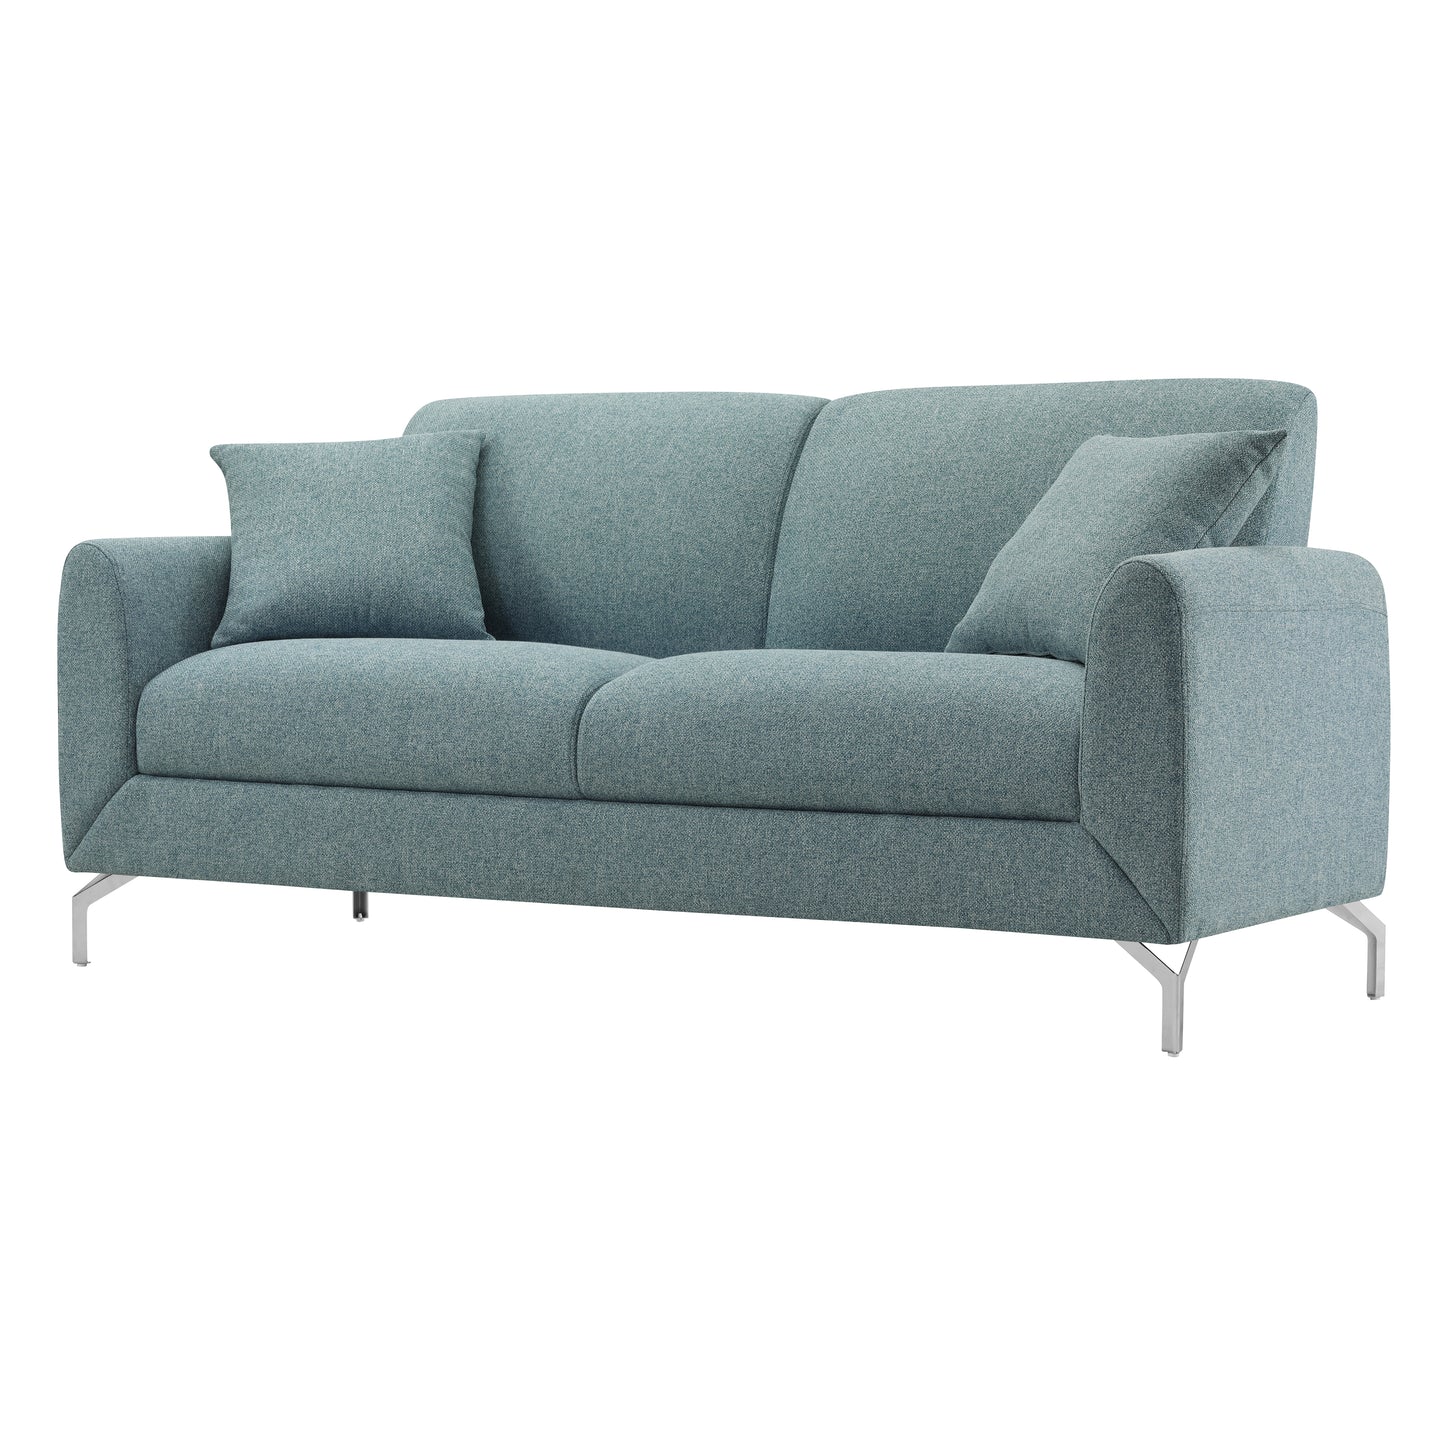 Noreen Contemporary Blue Fabric Rounded Arm Living Room Collection